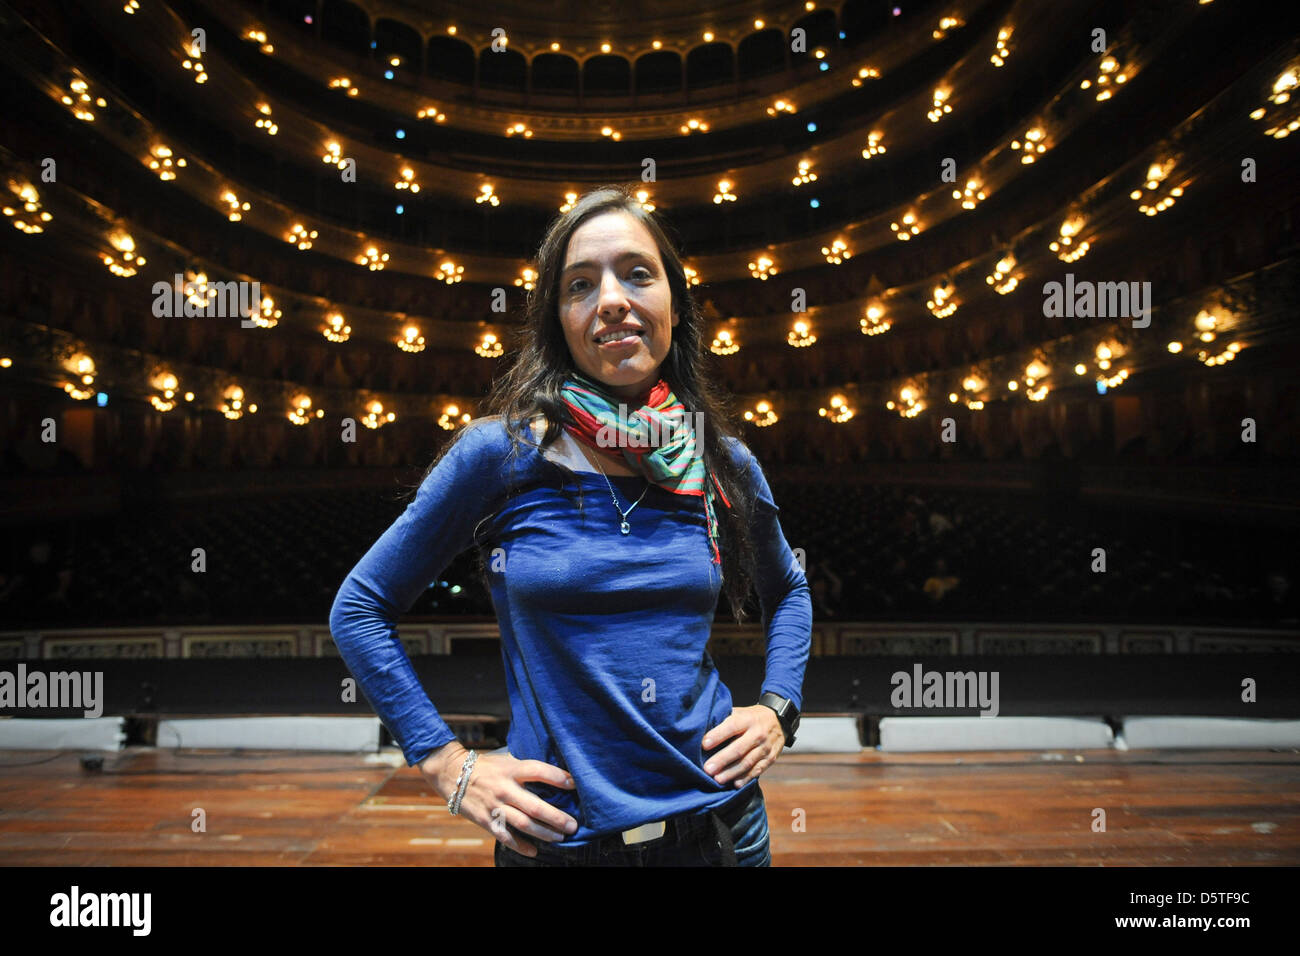 Director Valentina Carrasco poses on the stage of the Teatro Colon during a rehearsal of 'The Compact Ring' by Richard Wagner in Buenos Aires, Argentina, 13 November 2012. The compact version of Wagner's 'Ring' directed by Valentina Carrasco will celebrate its world premiere on 27 November 2012. The four operas of this version are planned to be performed during seven hours on a sin Stock Photo